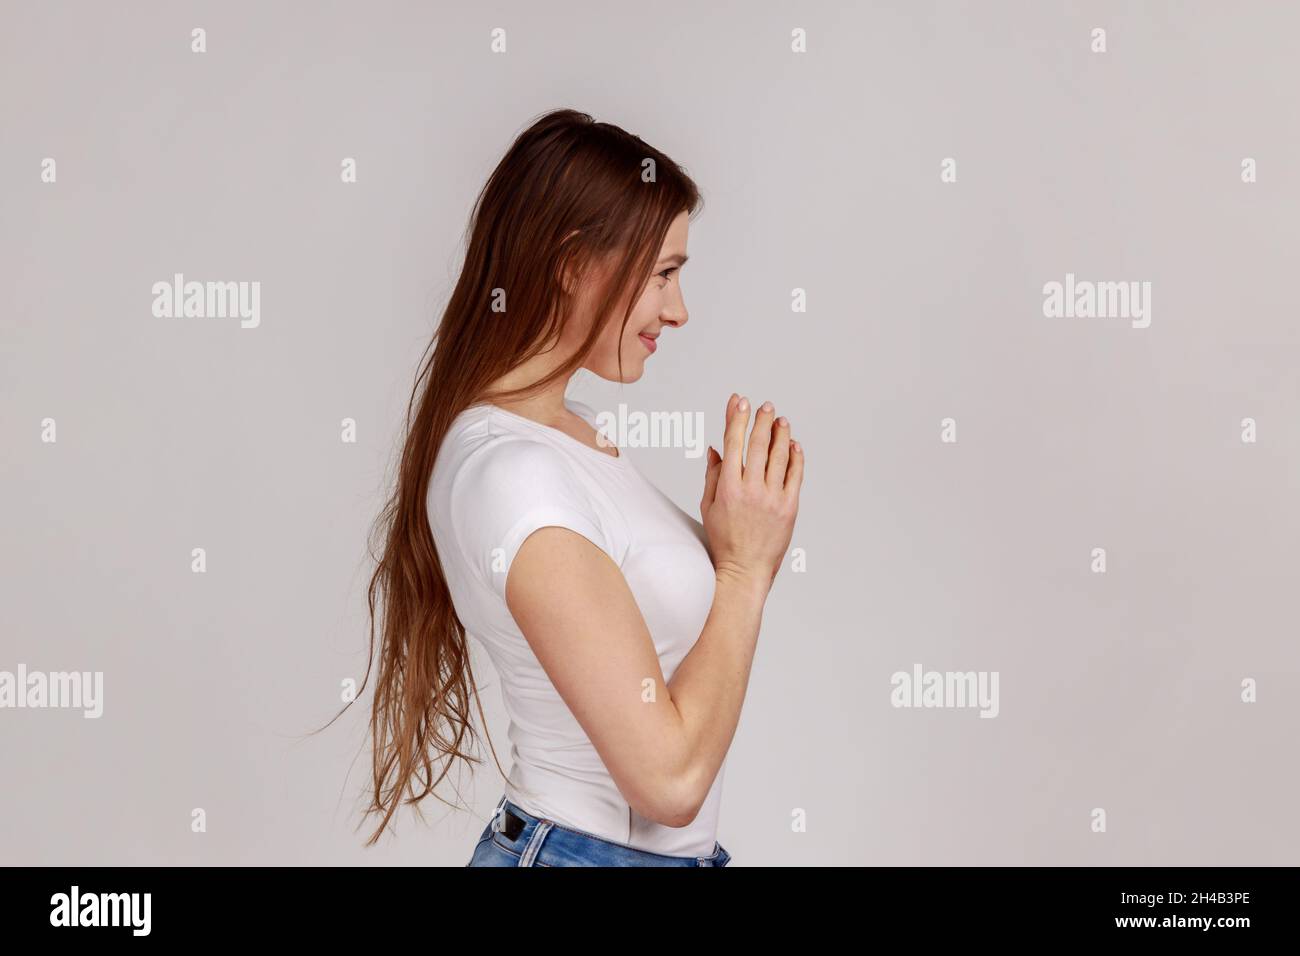 Side view portrait of scheming devious woman clasping hands and thinking over tricky plan, having sly cunning idea to prank, wearing white T-shirt. Indoor studio shot isolated on gray background. Stock Photo